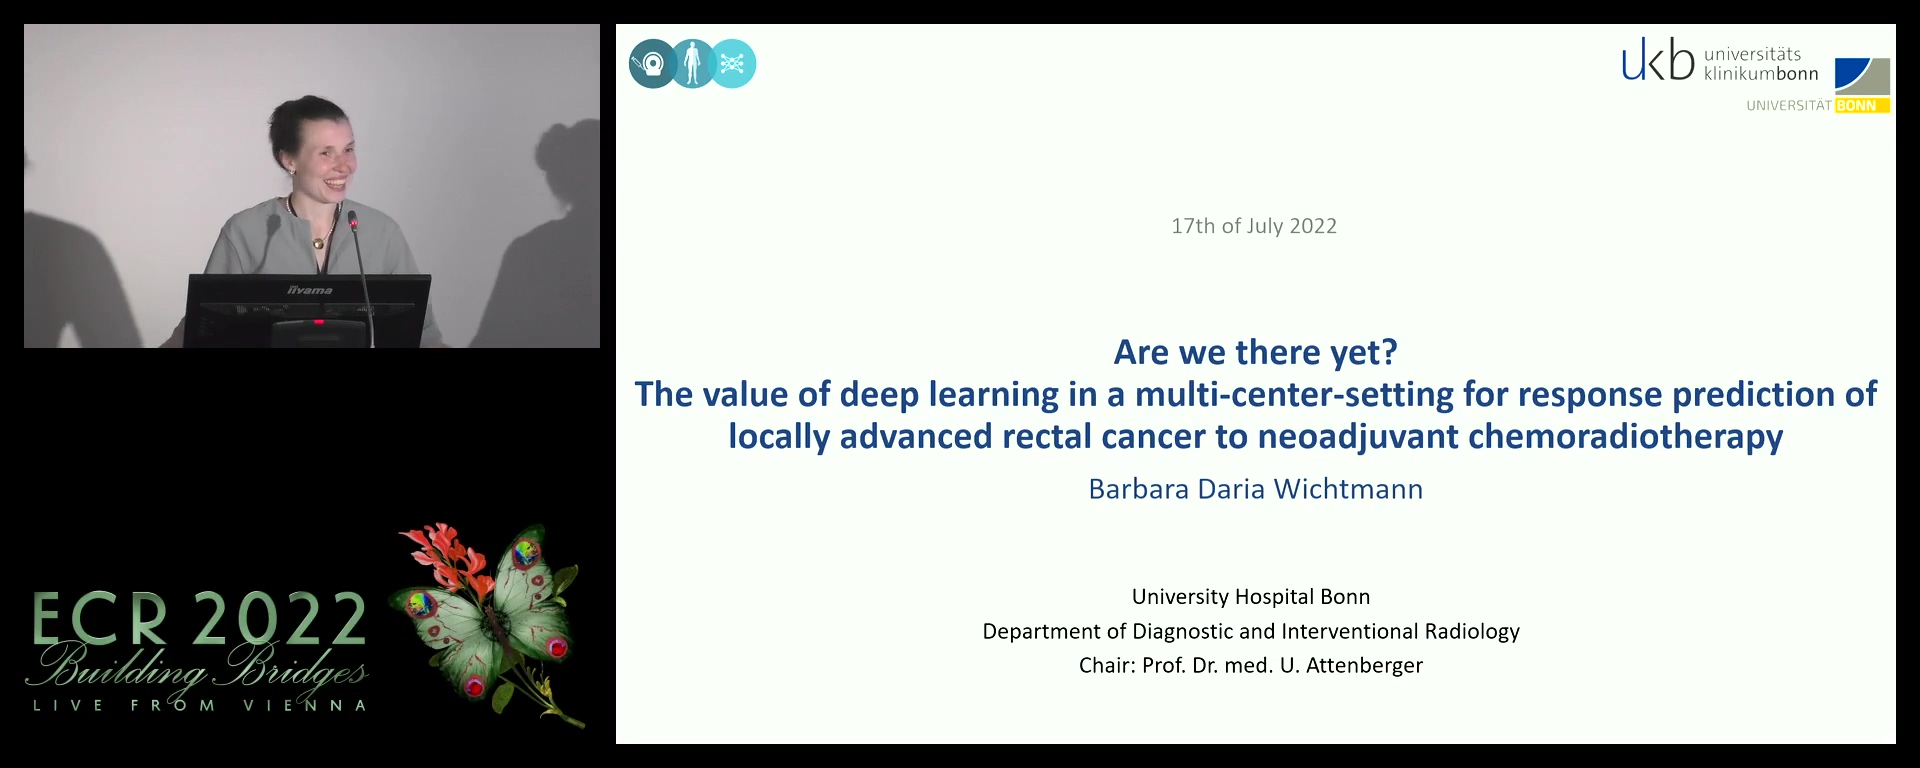 Are we there yet? The value of deep learning in a multicentre-setting for response prediction of locally advanced rectal cancer to neoadjuvant chemoradiotherapy